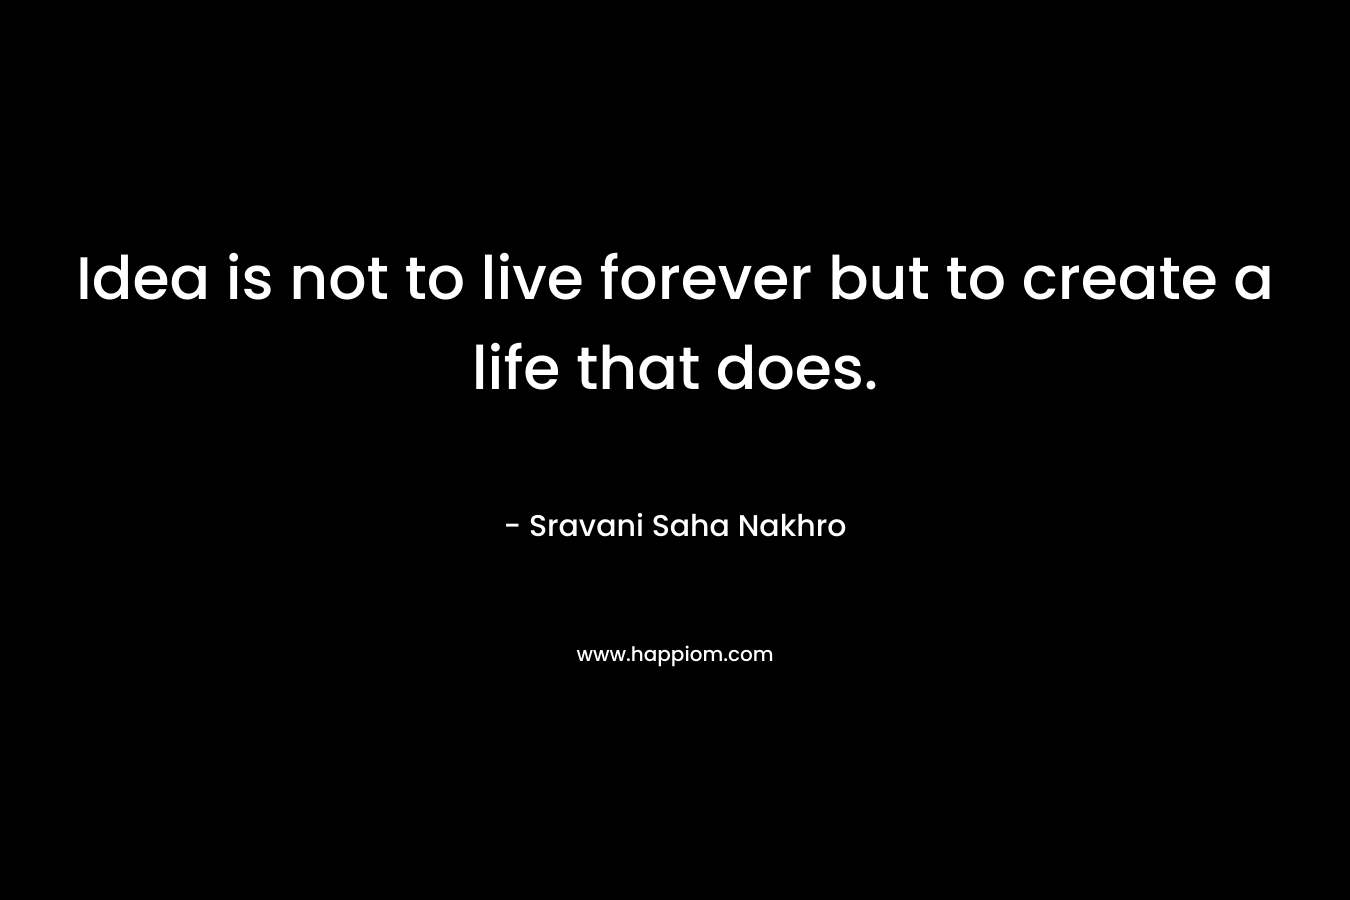 Idea is not to live forever but to create a life that does.